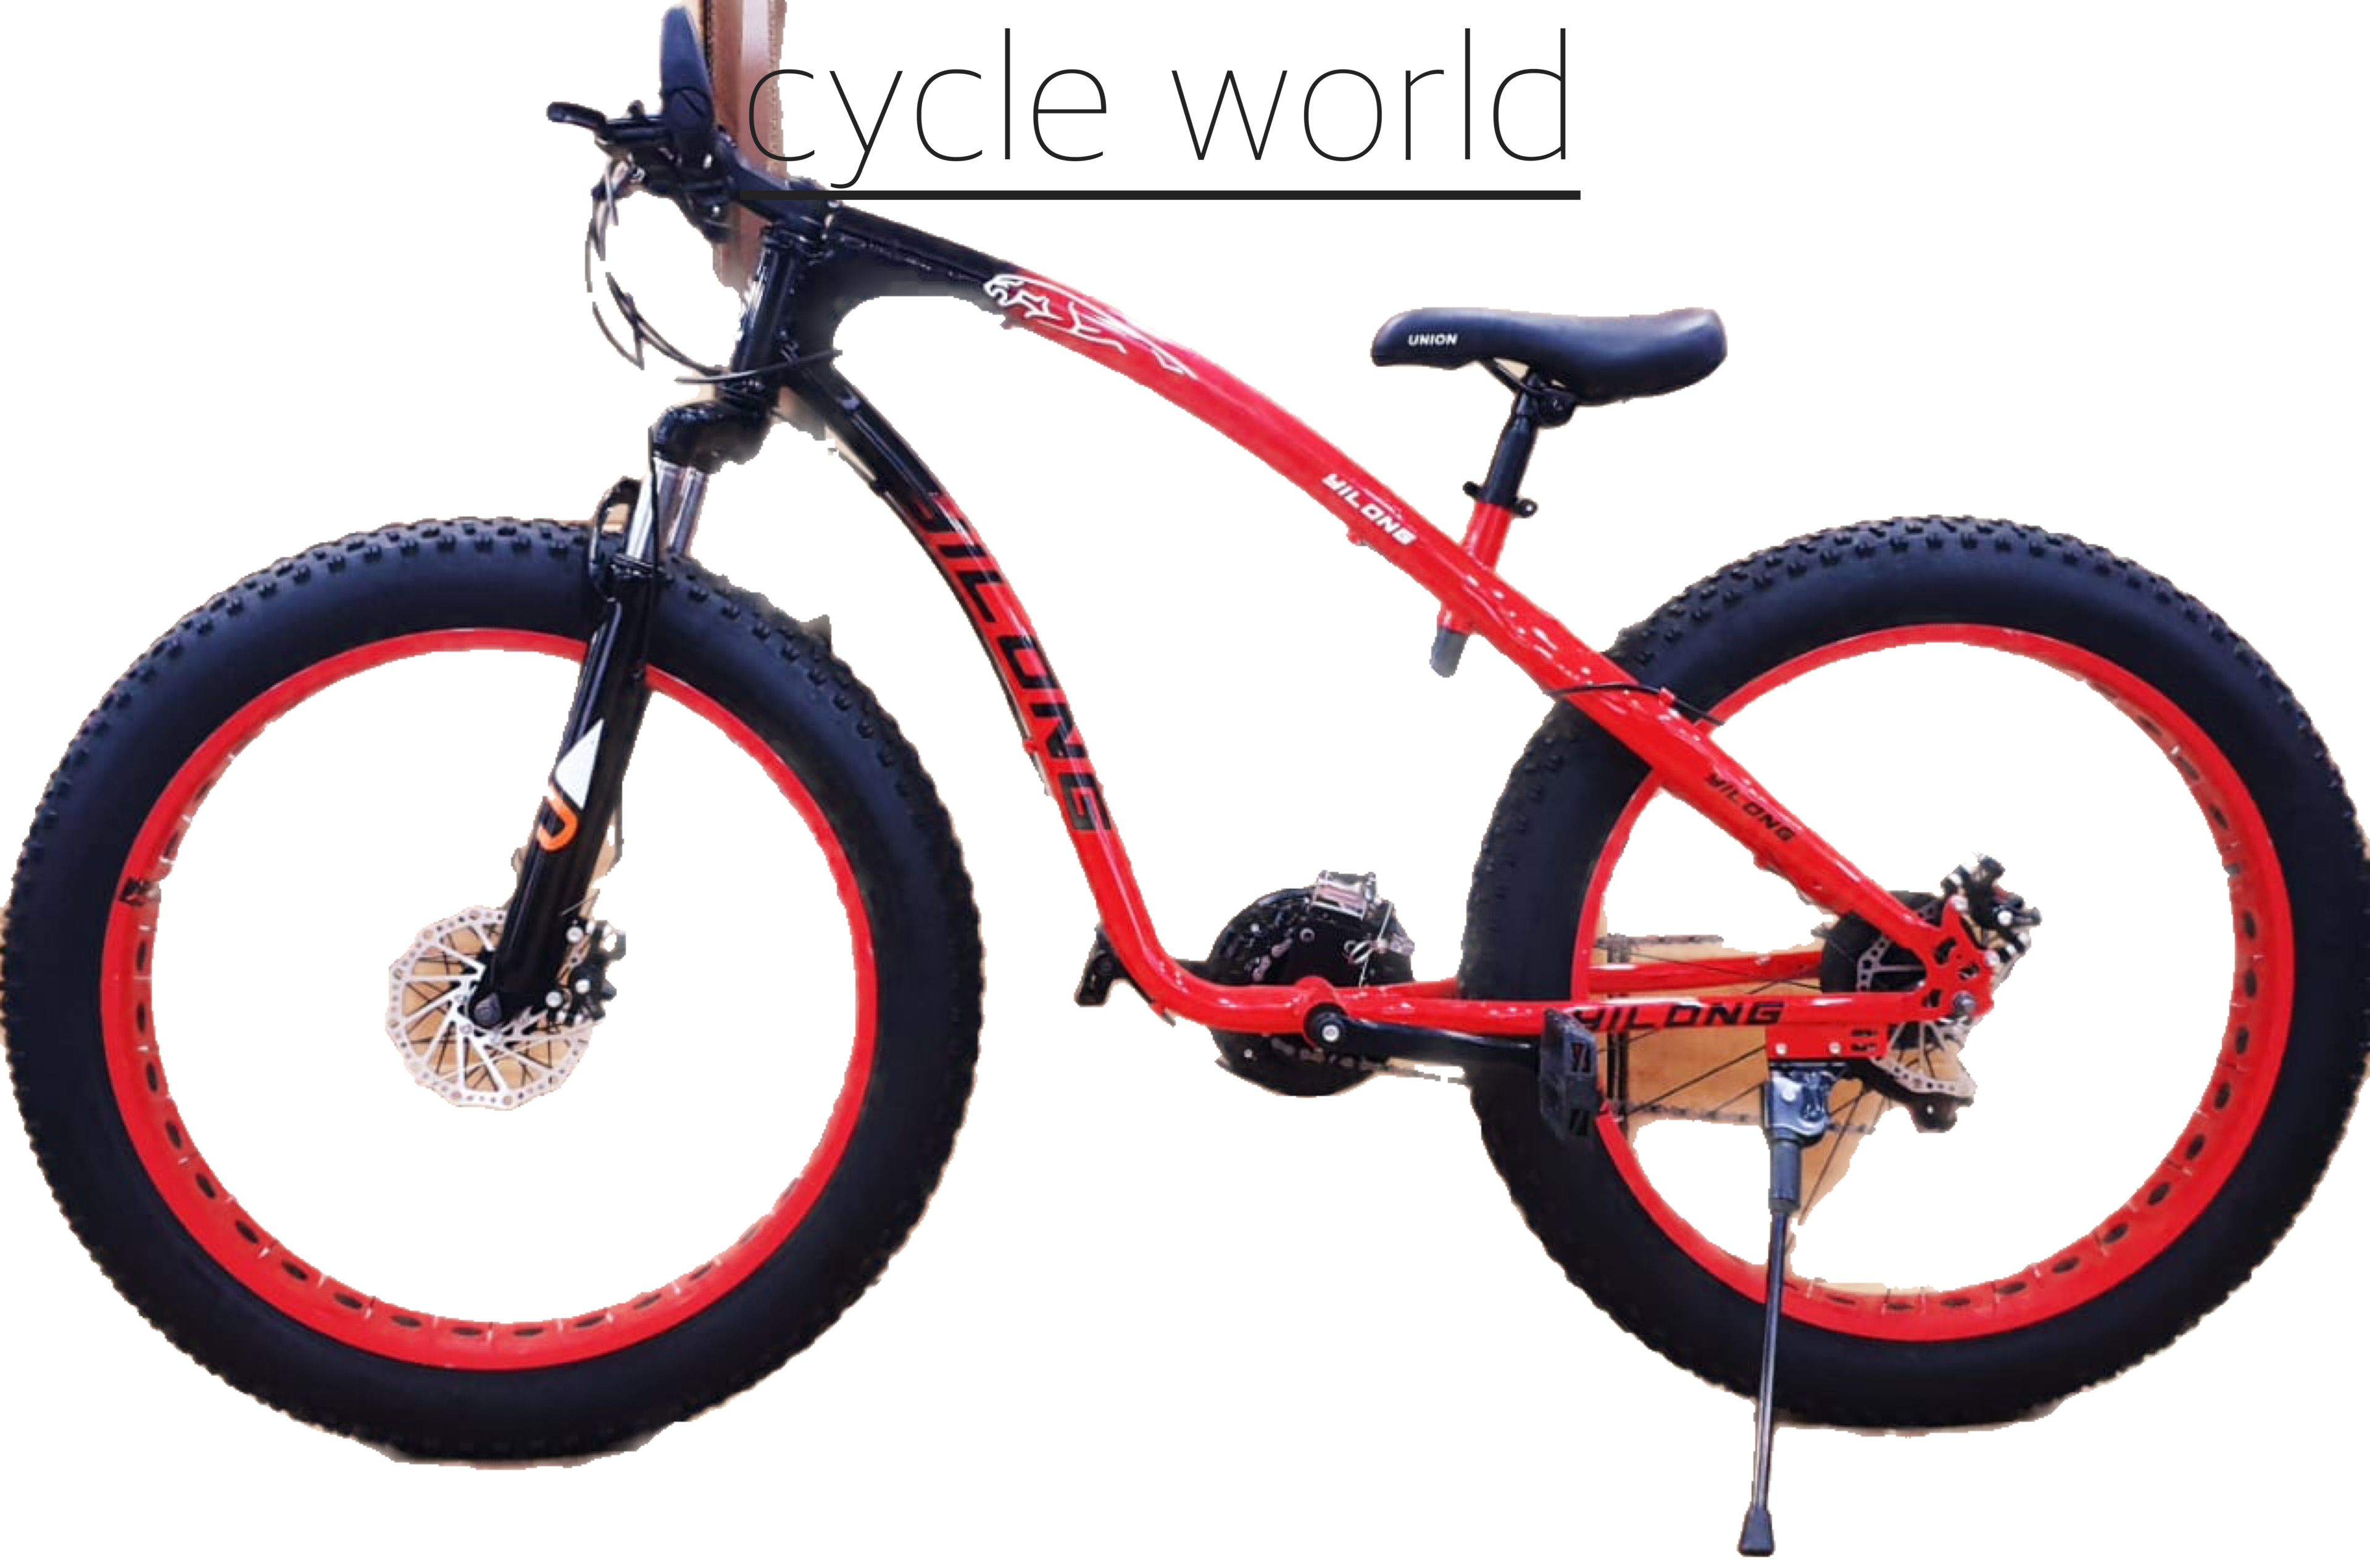 Fat Tyre Cycle dealer In Chandigarh | AVERY FREEWHEEL (P) LTD. | Fat Tyre Cycle dealers In Chandigarh, Fat Tyre Cycle sellers In Chandigarh, Fat Tyre Cycle retailers In Chandigarh, Fat Tyre Cycle wholesalers In Chandigarh, Fat Tyre Cycle manufacturers In Chandigarh - GL65000